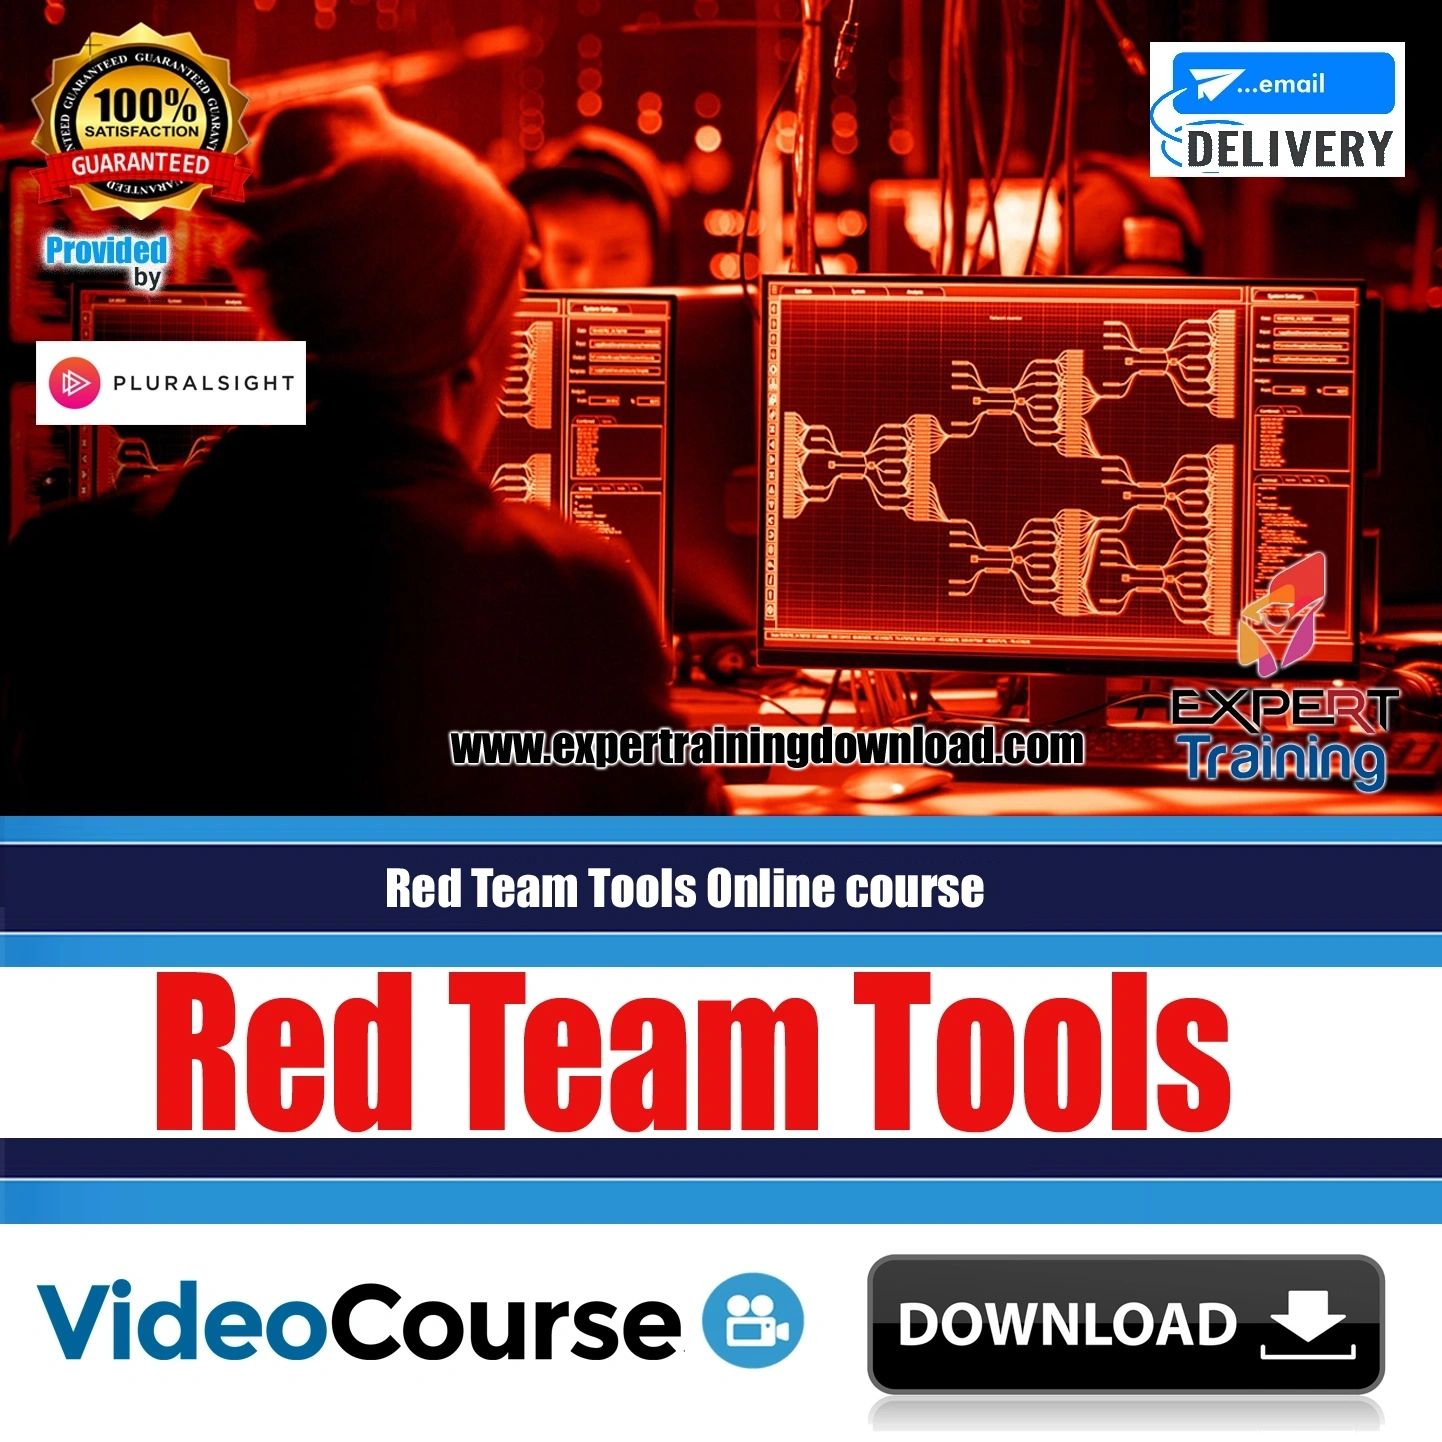 Red Team Tools Online Course